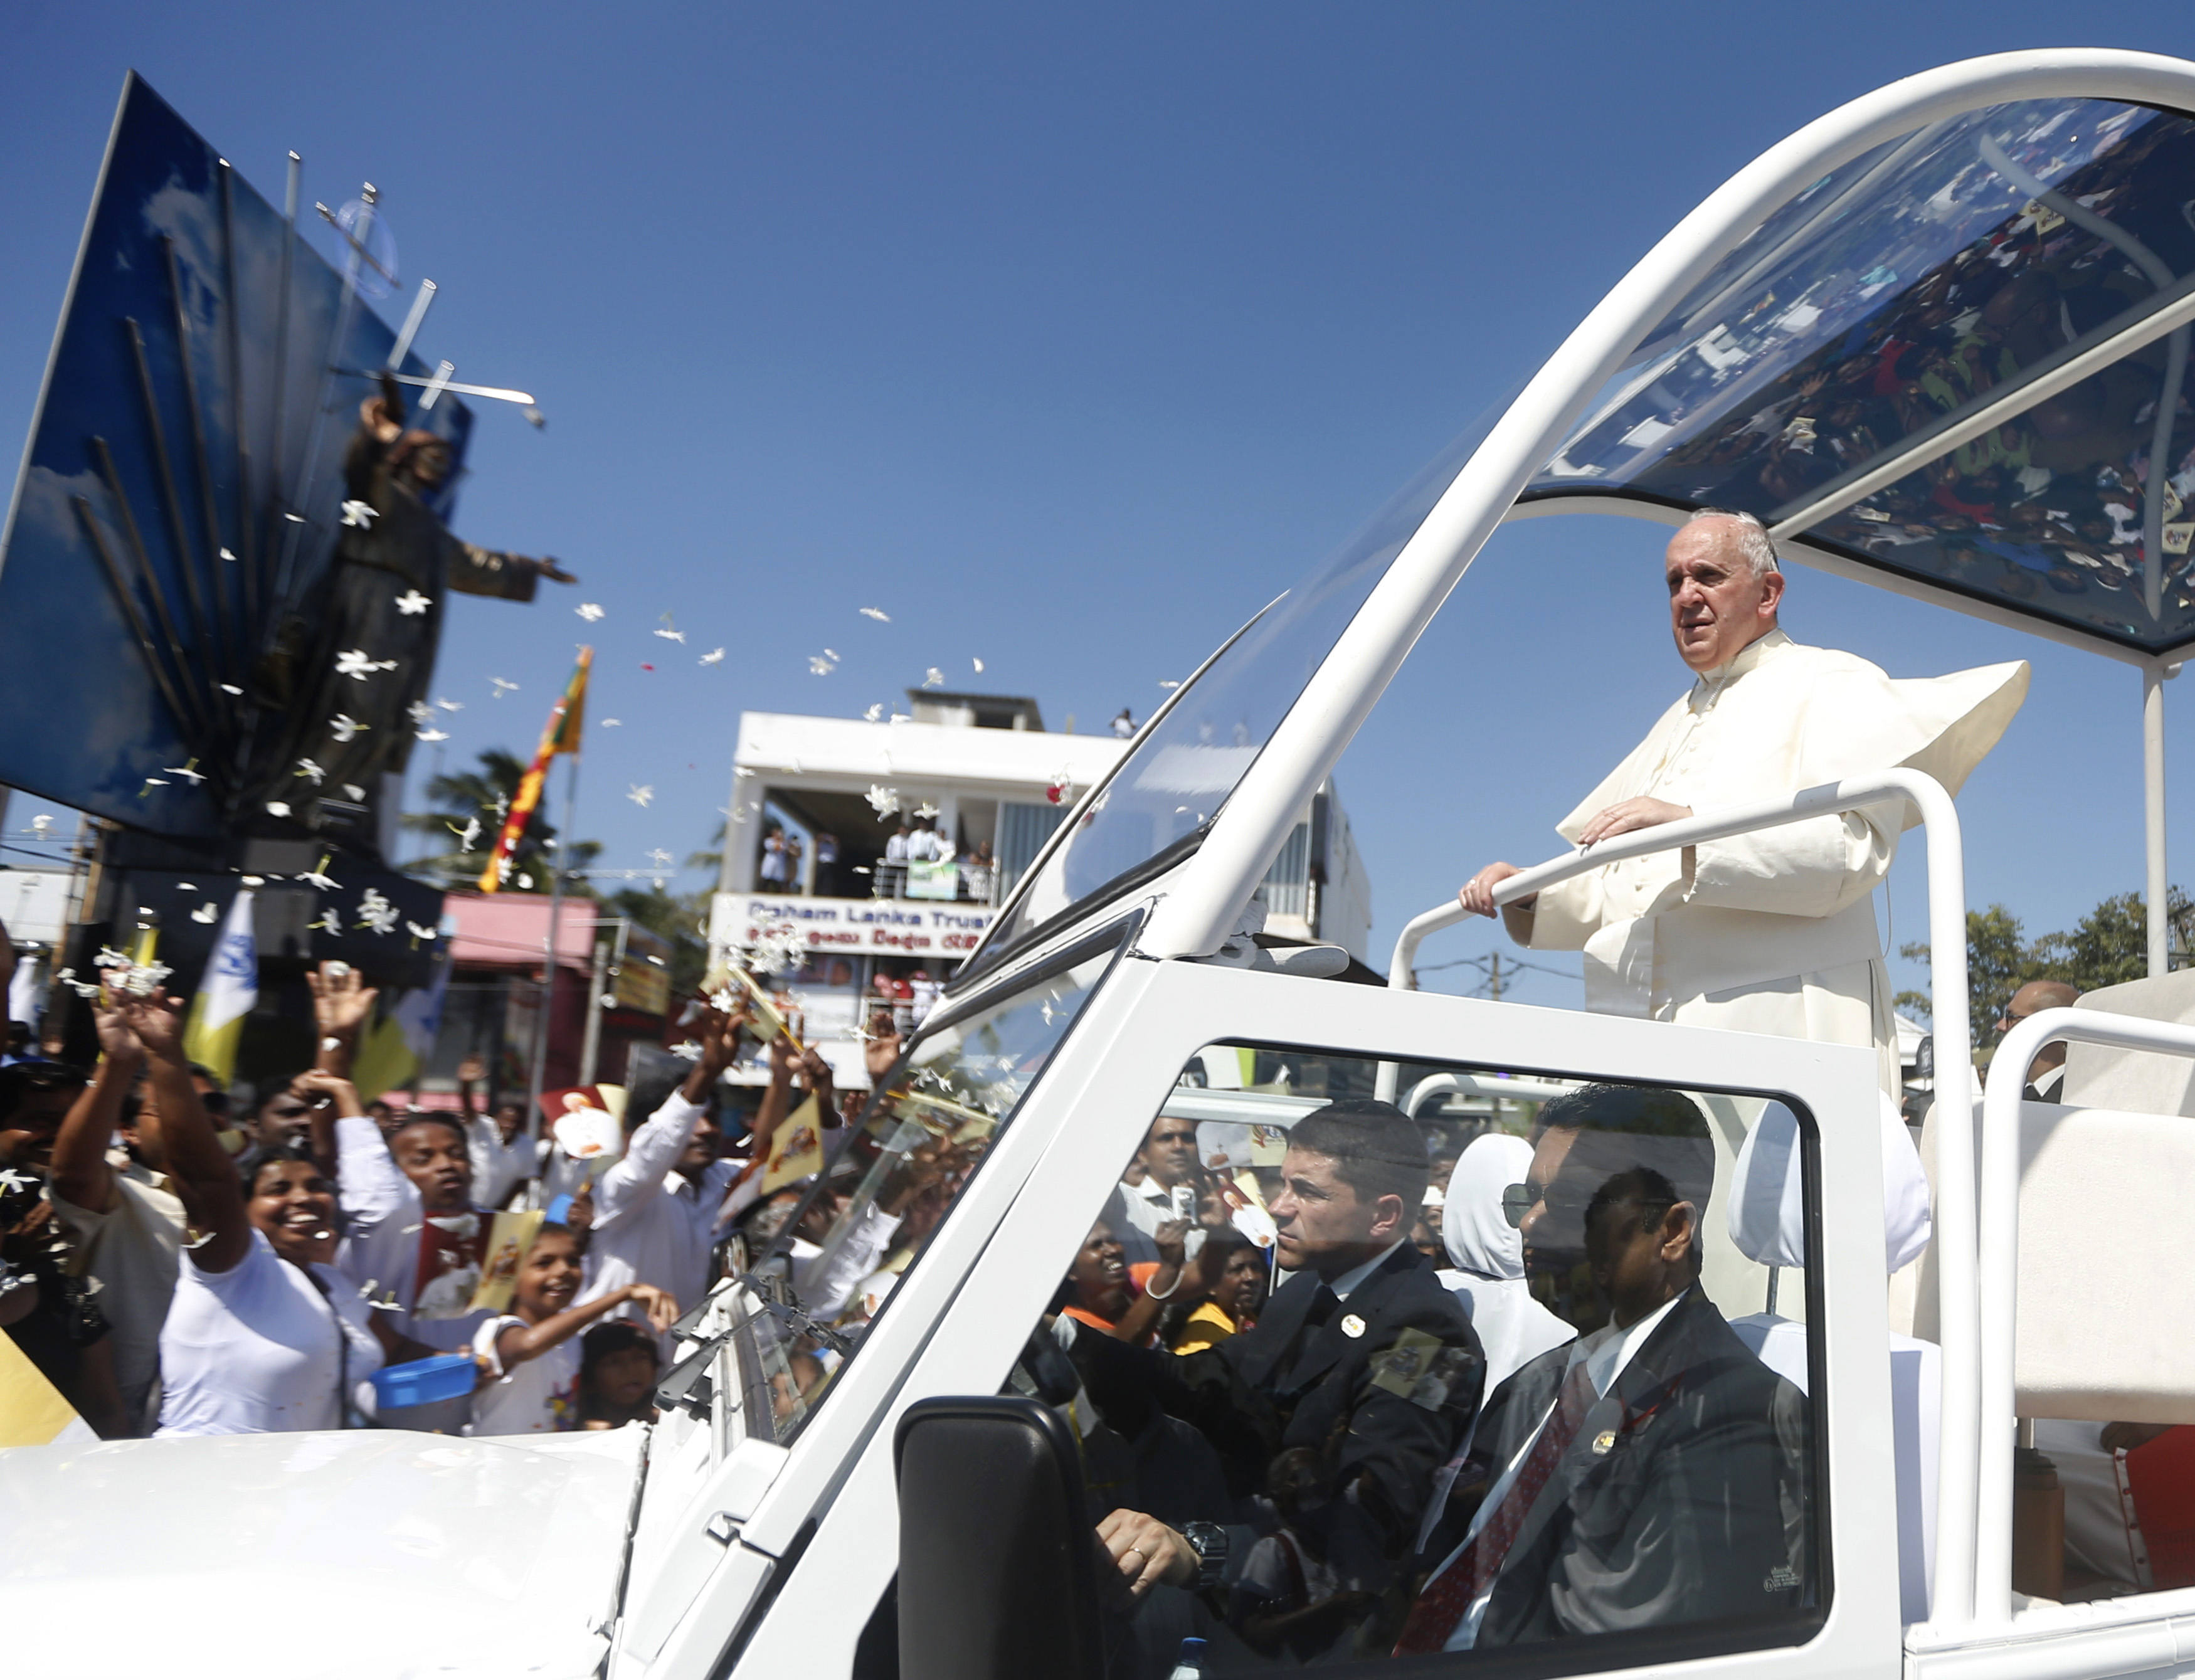 Pope Francis stands on his vehicle as devotees gather on the road to see him after he arrived at the Colombo airport